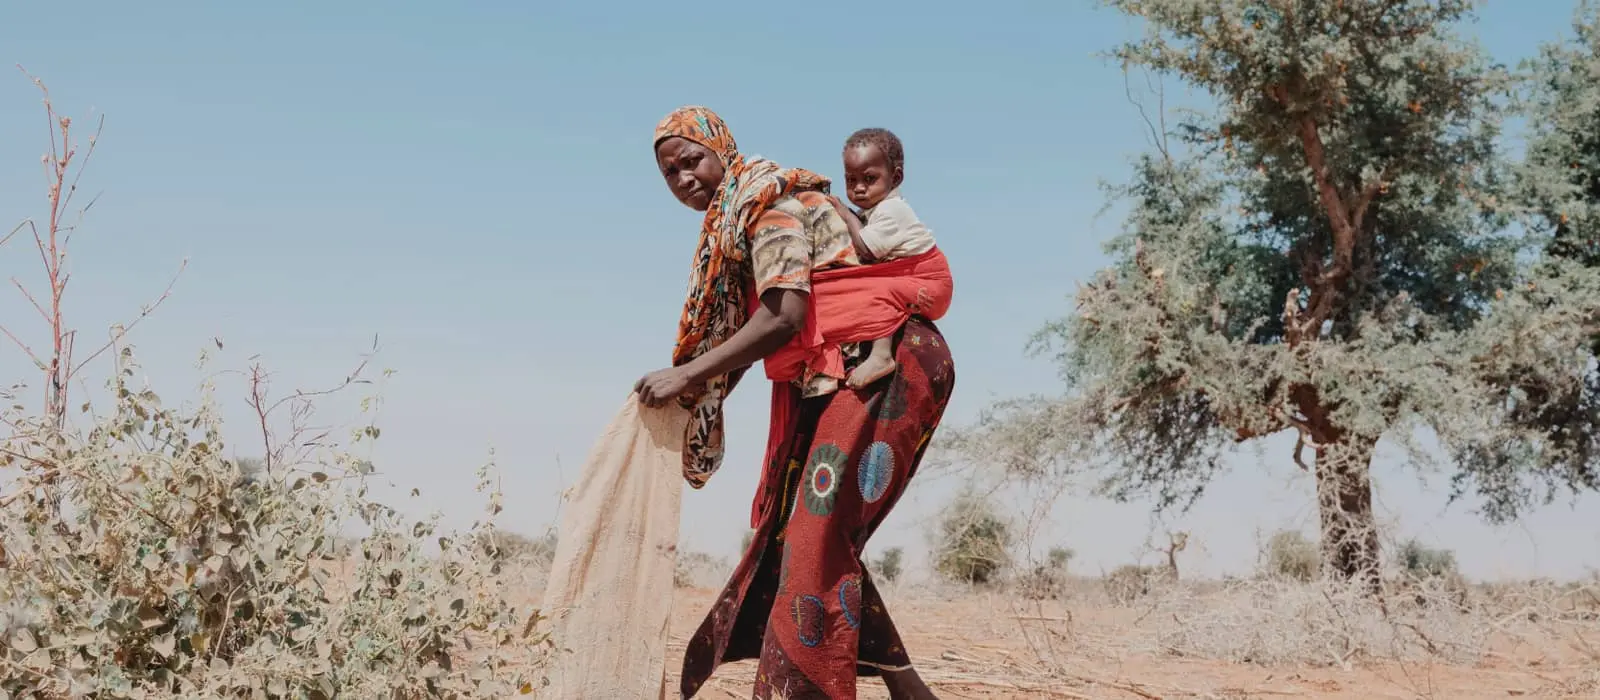 Nigerian woman and her daughter prepare a field for rainy season